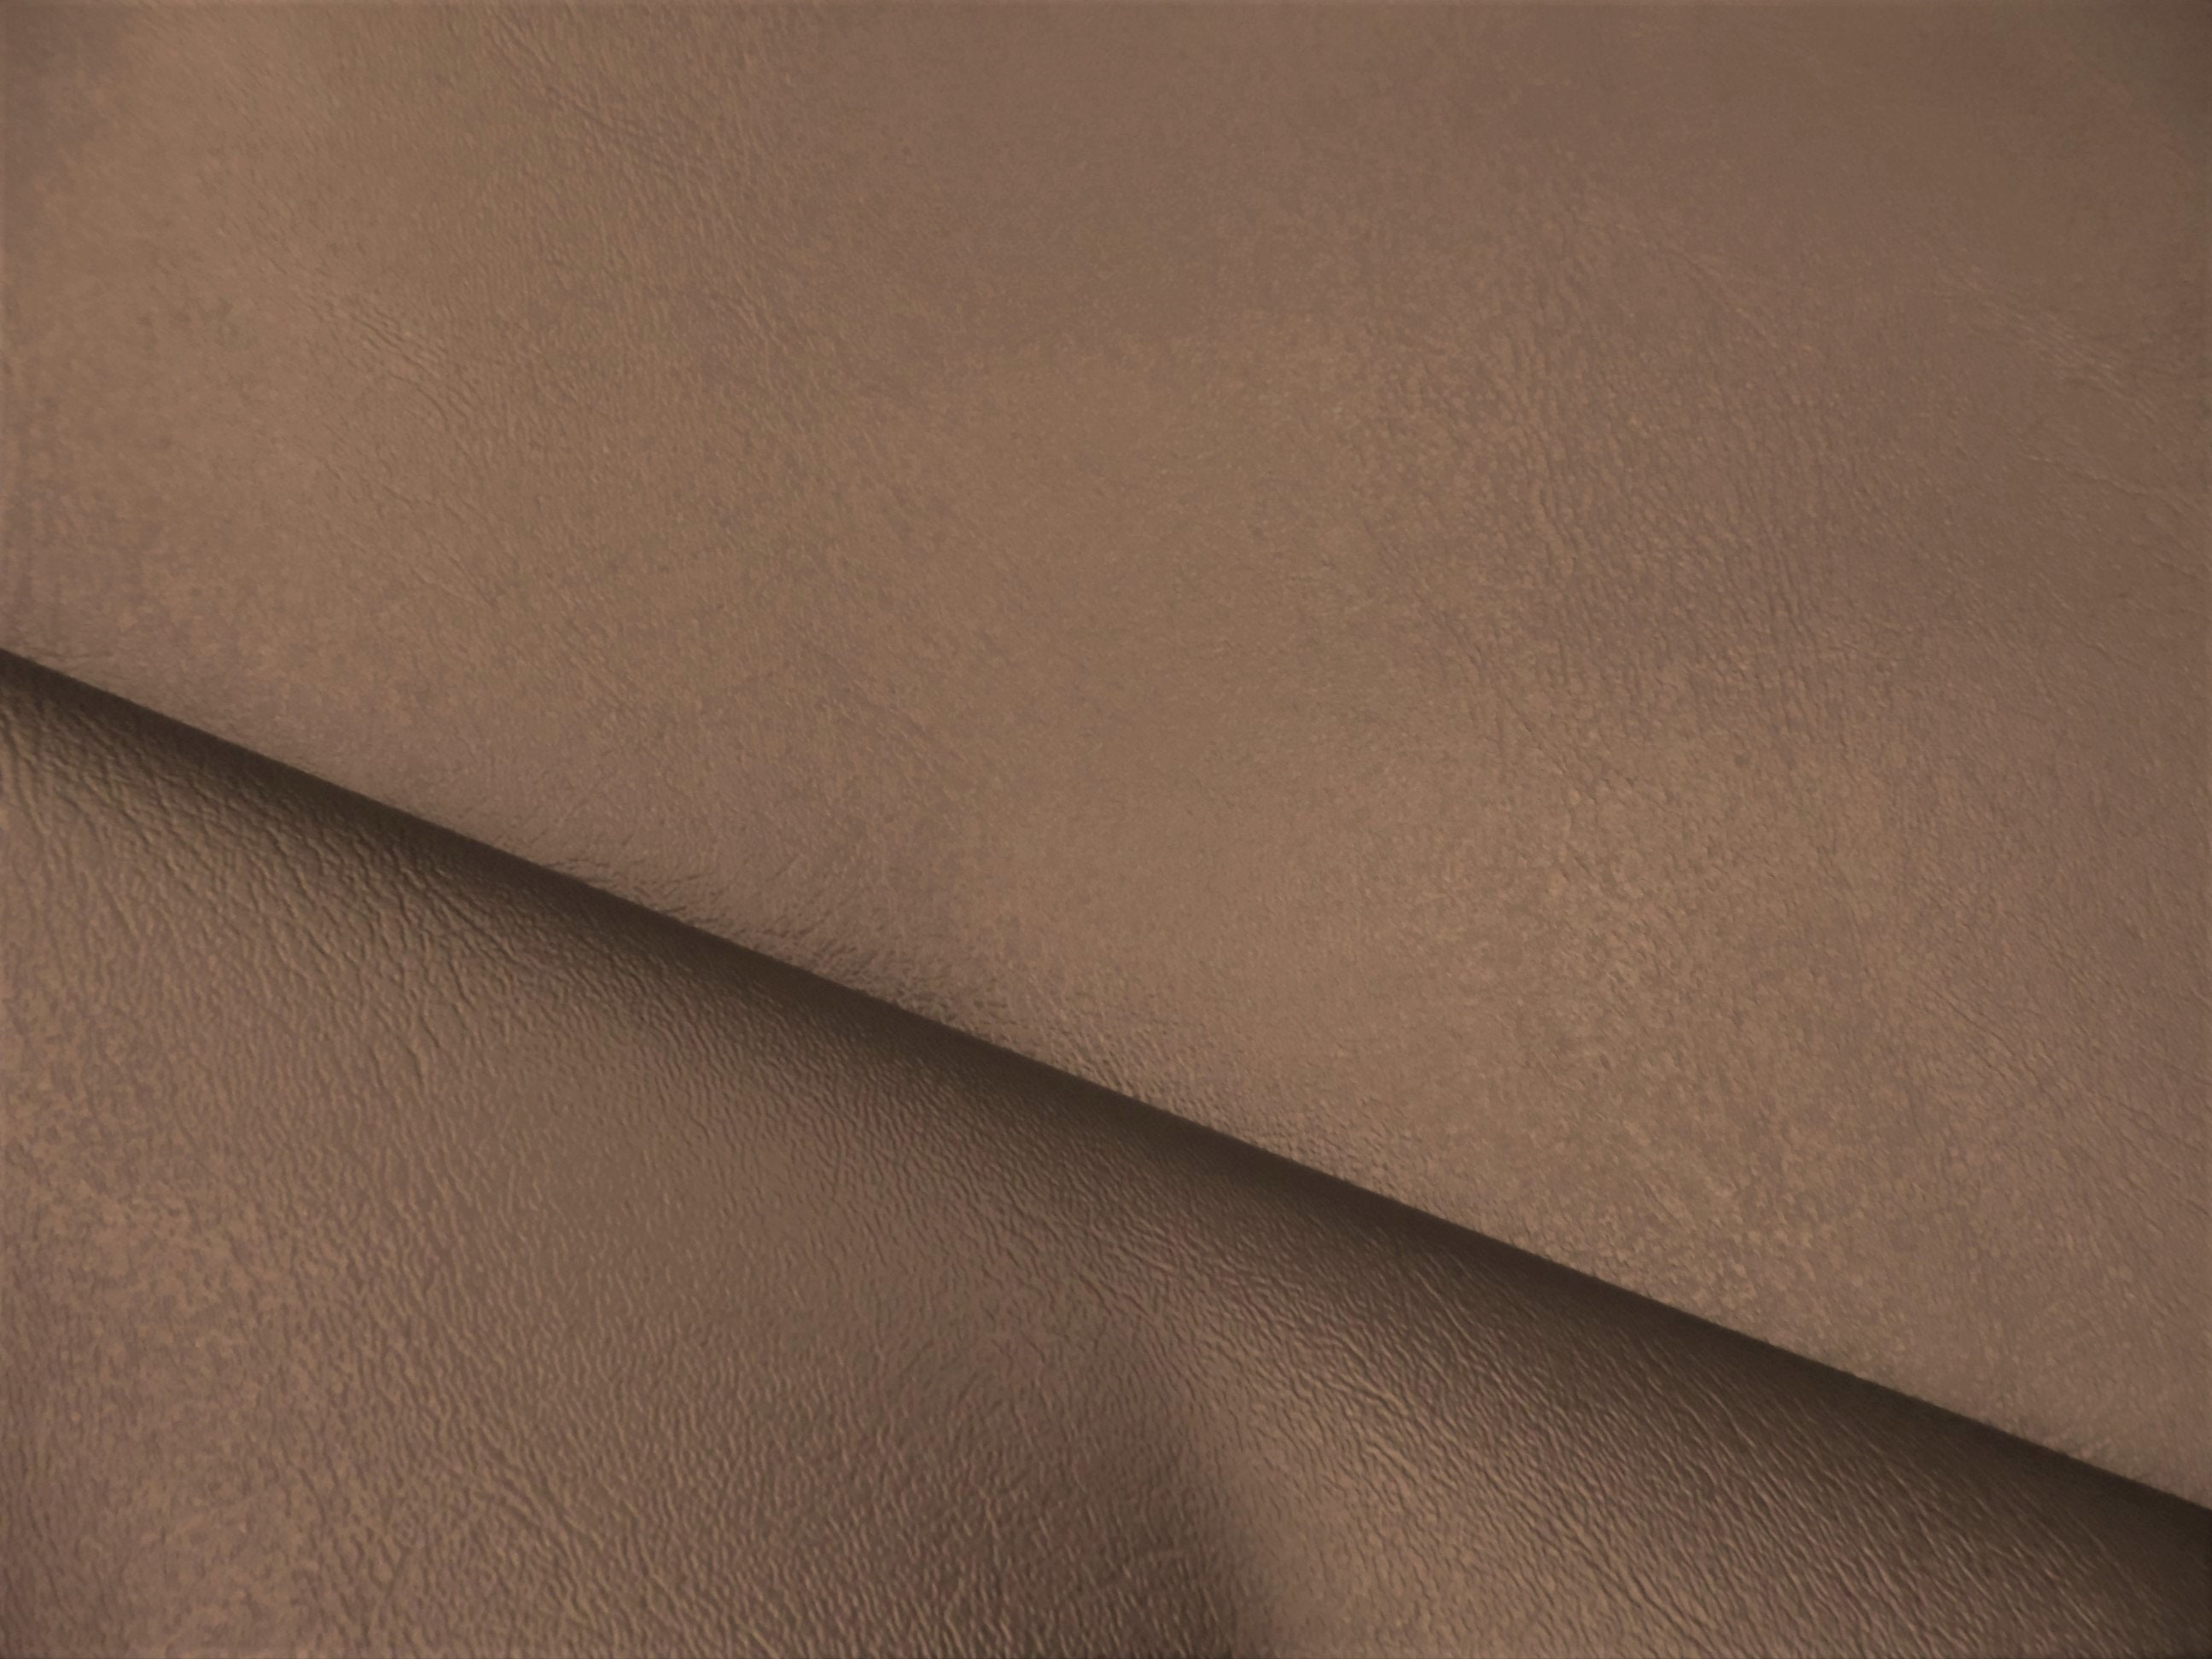 Bycast65 Brown Correct-Grain Pattern Faux Leather Marine Vinyl Fabric